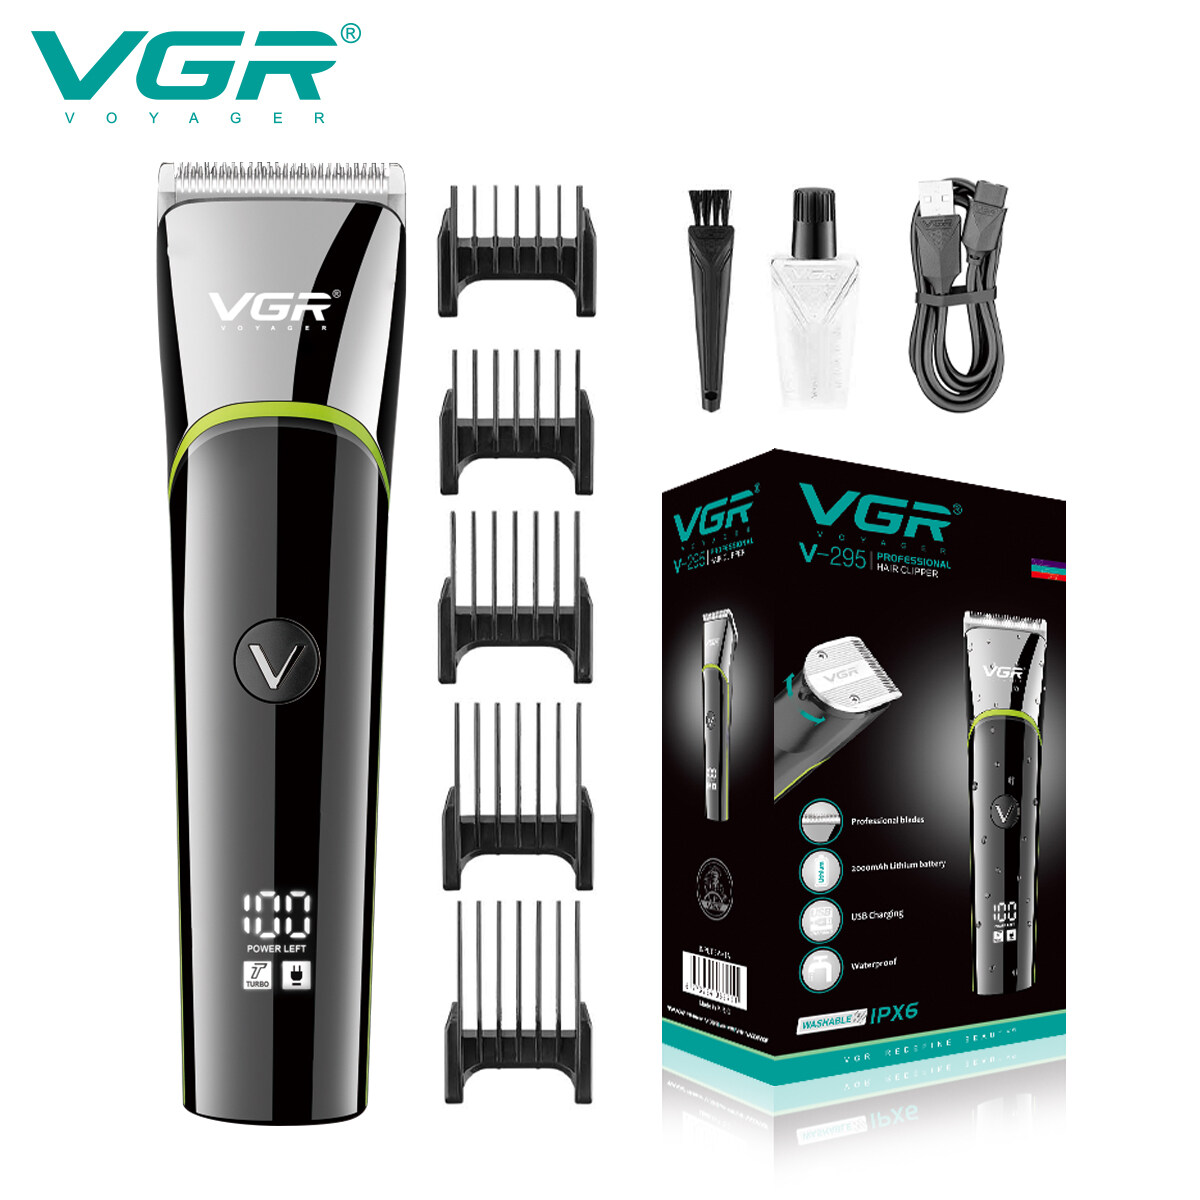 Portable Hair Trimmer Factory, Professional Hair Clipper Trimmer Factory, Rechargeable Hair Trimmer Factory